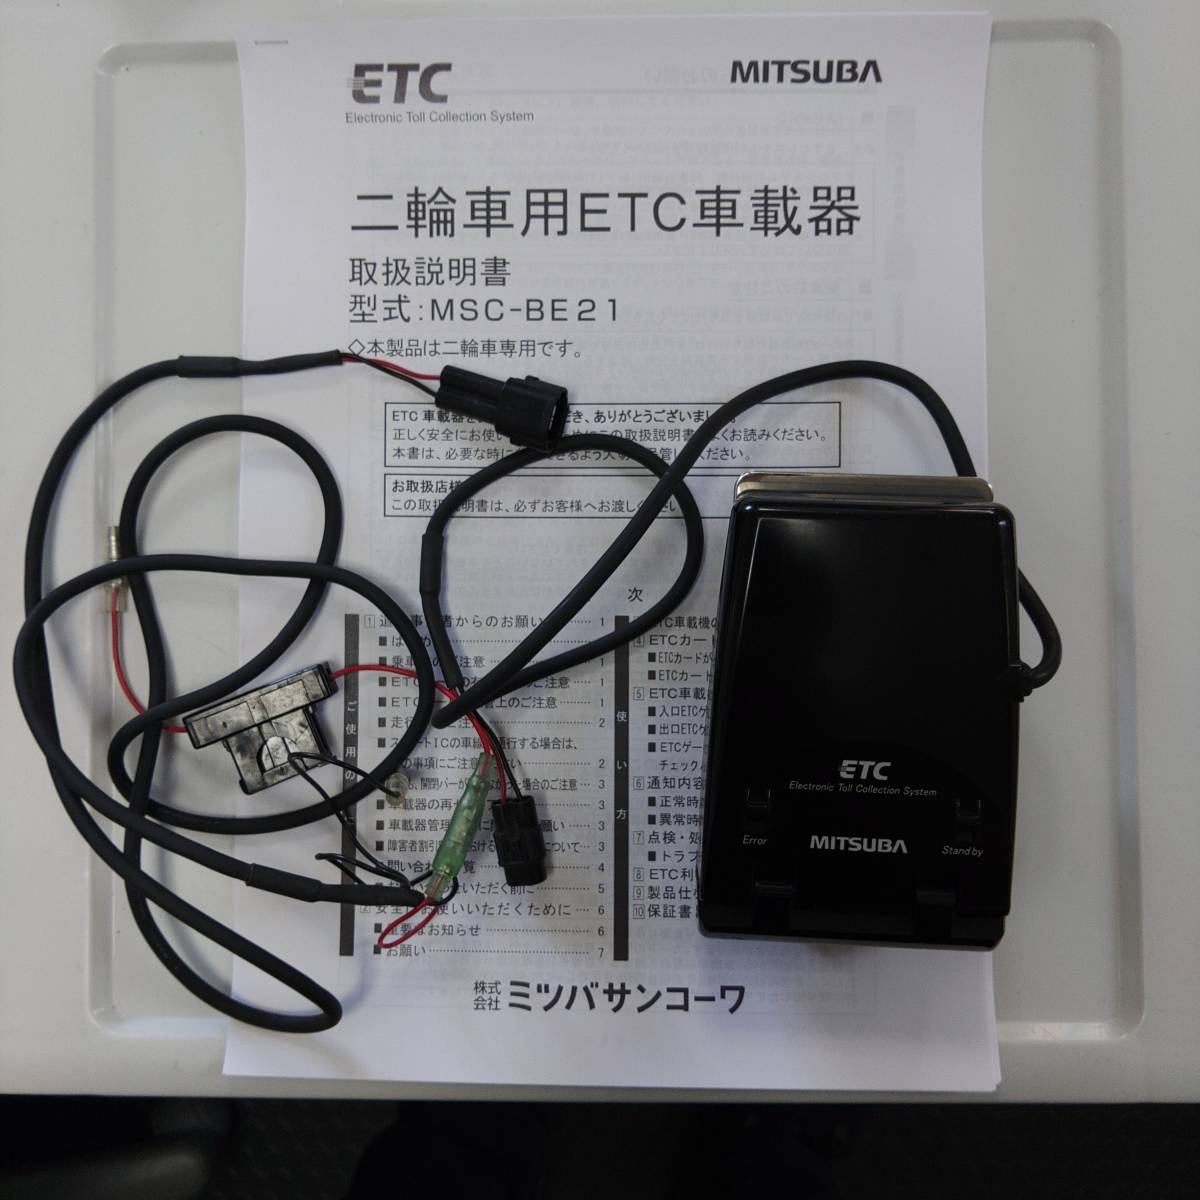  Mitsuba sun ko-waMITSUBA two wheel car antenna solid type ETC on-board device MSC-BE21 new sp rear s correspondence on-board device Manufacturers production end goods 